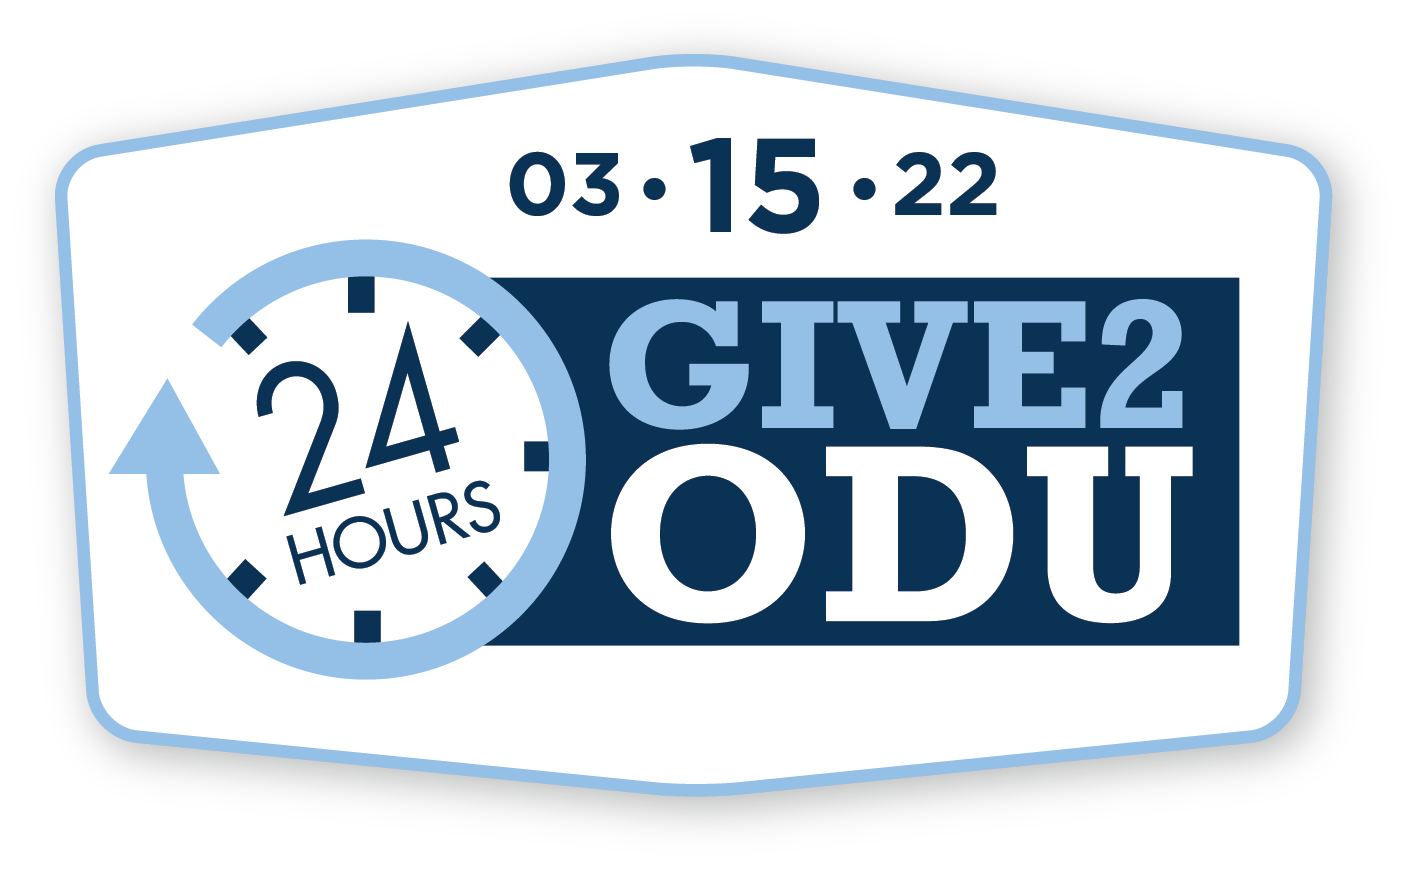 ODU’s Day of Giving Scheduled for March 15 Old Dominion University